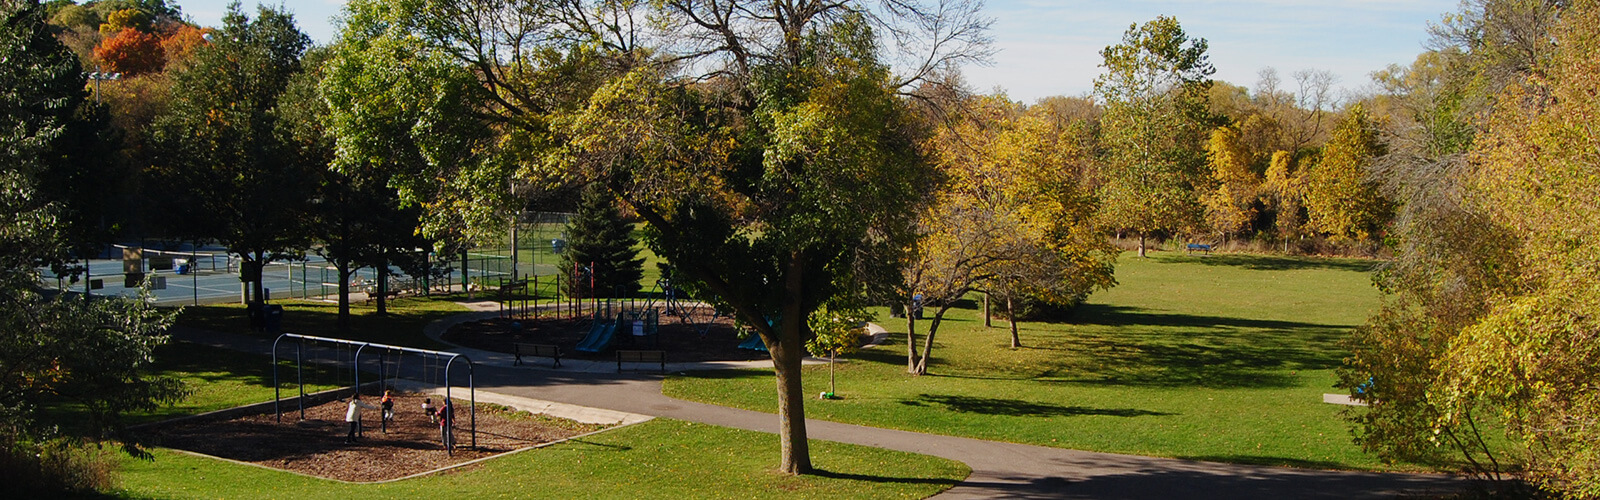 Looking down at Albion Gardens Park from a hilltop. There are children playing on the playground swingset which is surrounded by a maintained lawn, and lush autumn trees. Behind the playground is a fenced tennis court. A paved path winds through the park.